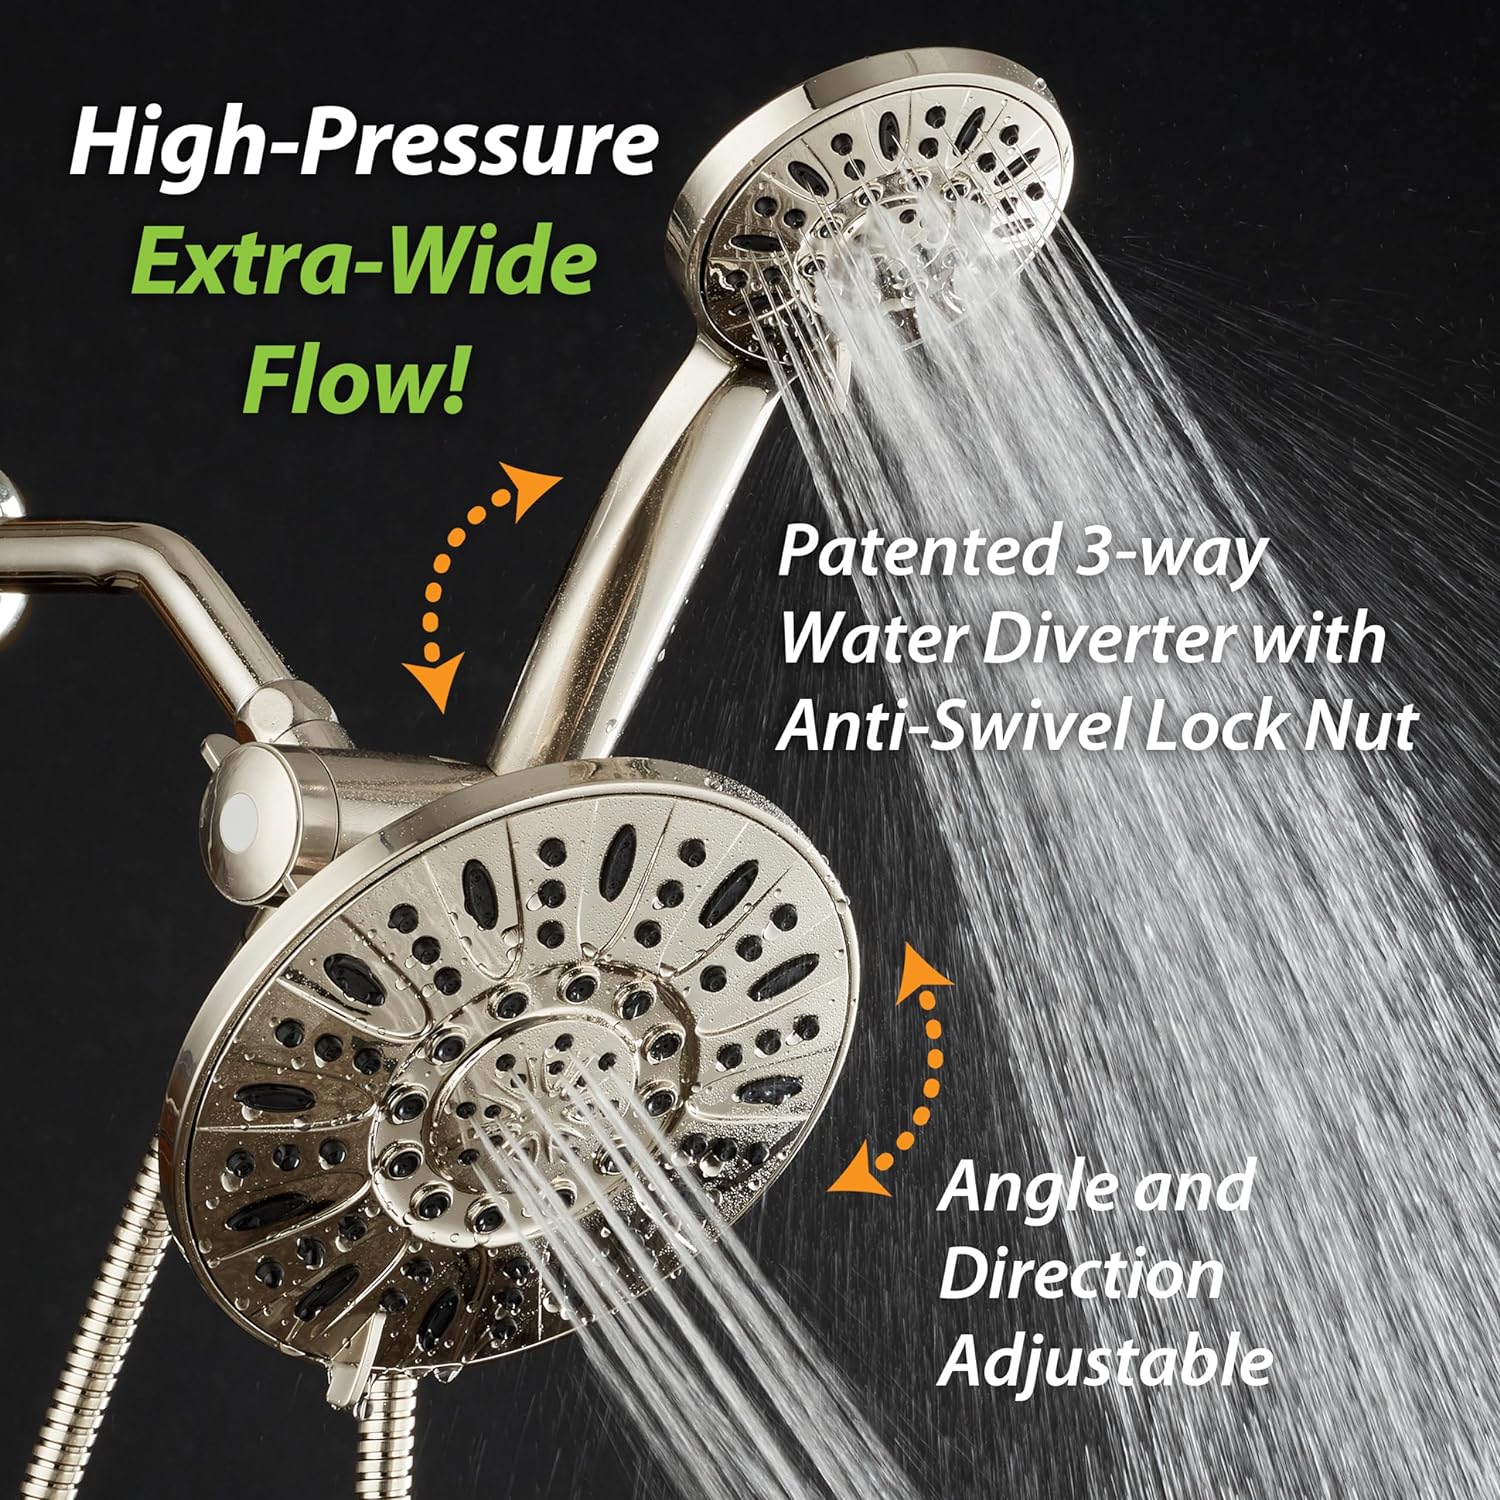 AquaDance 7 Premium High Pressure 3-Way Rainfall Combo for The Best of Both Worlds - Enjoy Luxurious Rain Showerhead and 6-Setting Hand Held Shower Separately or Together - Chrome Finish - 3328